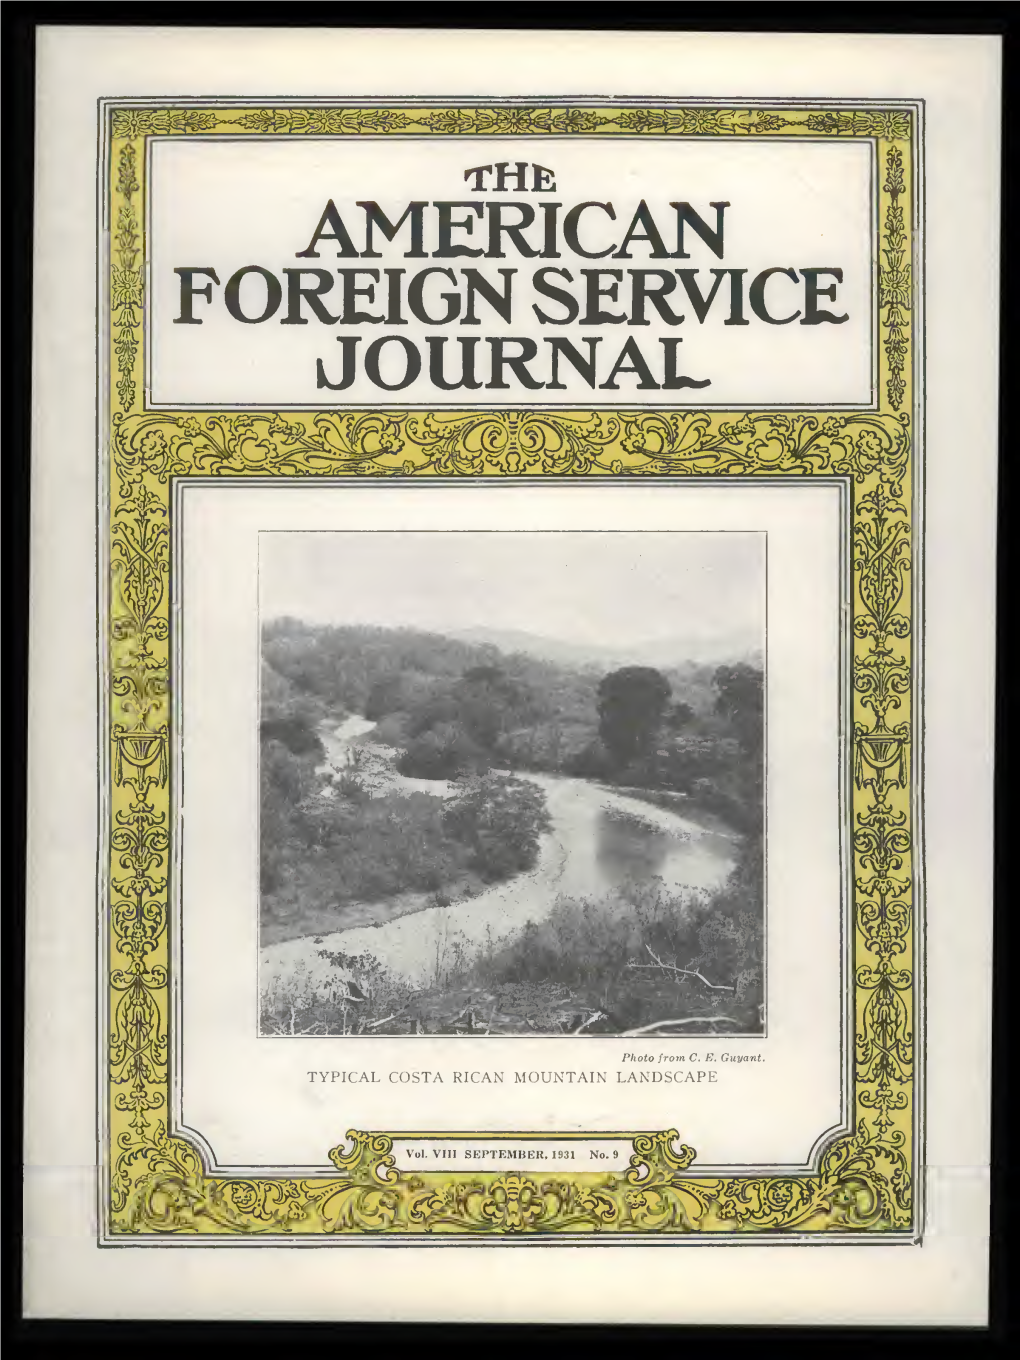 The Foreign Service Journal, September 1931